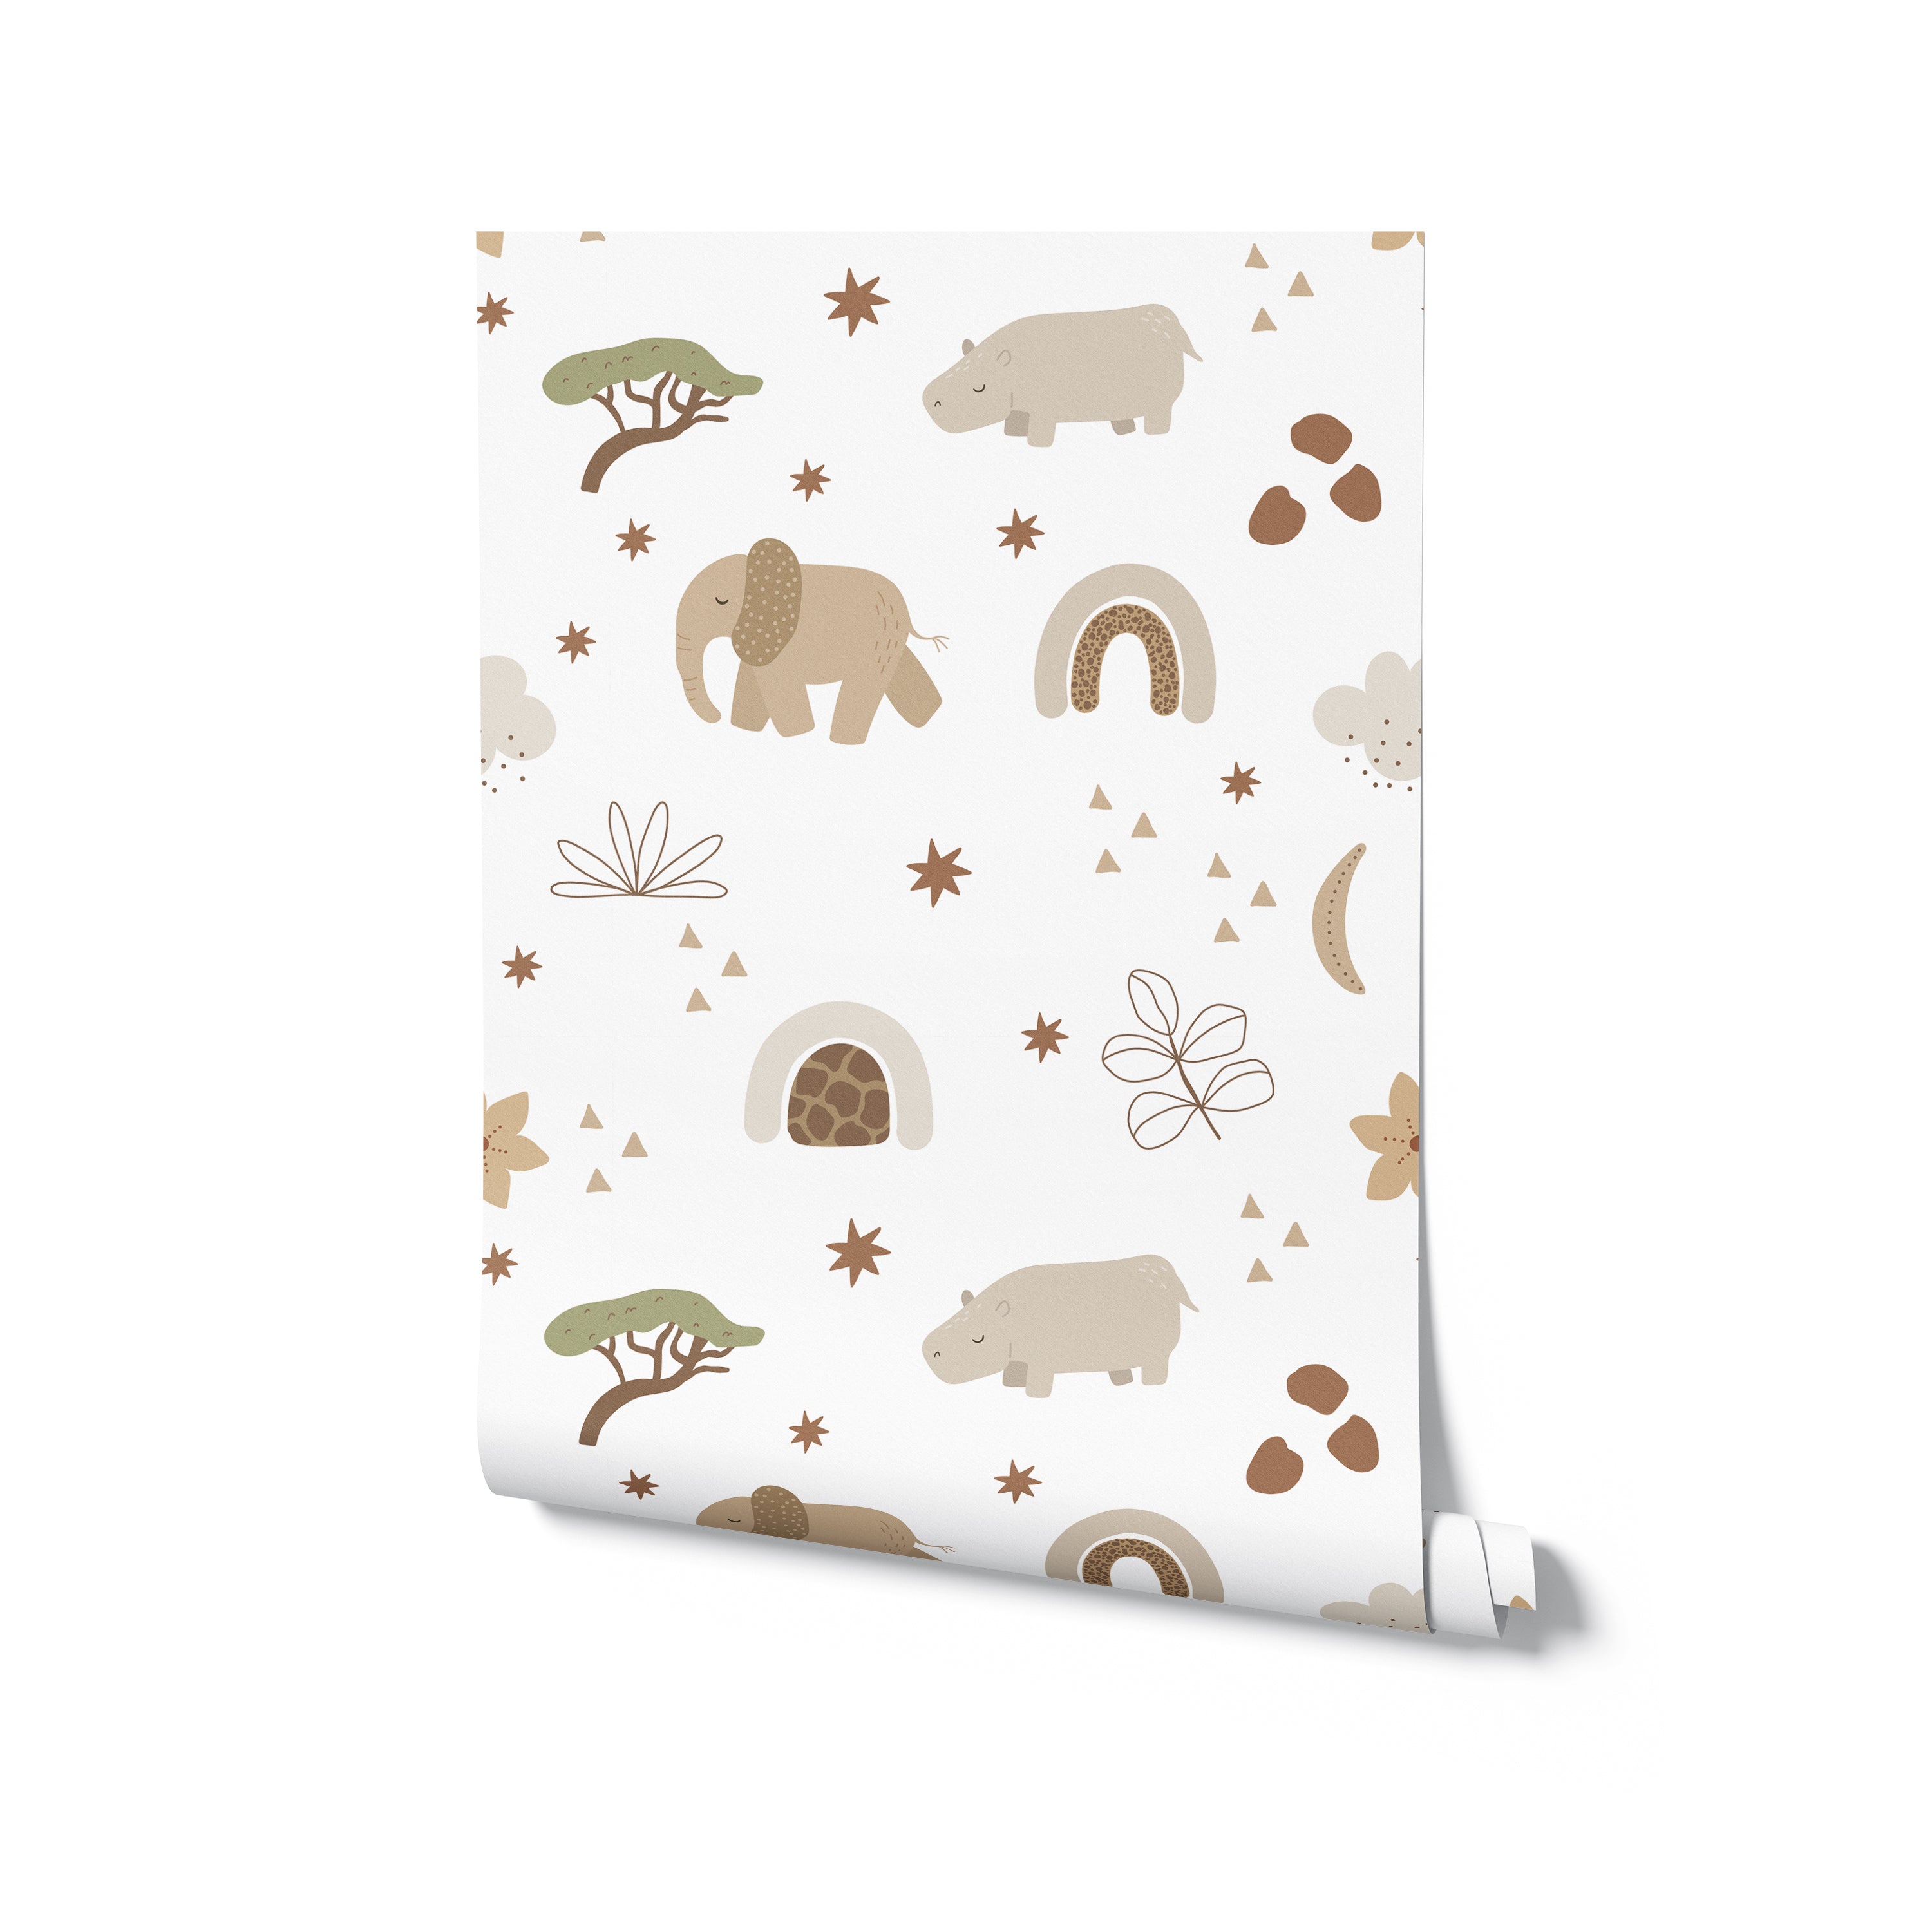 Roll of Safari Animals Kids Wallpaper III, displaying a serene pattern of safari animals and nature motifs in soft, neutral colors on a white base. This wallpaper is perfect for adding a playful yet soothing atmosphere to nurseries or young children's bedrooms